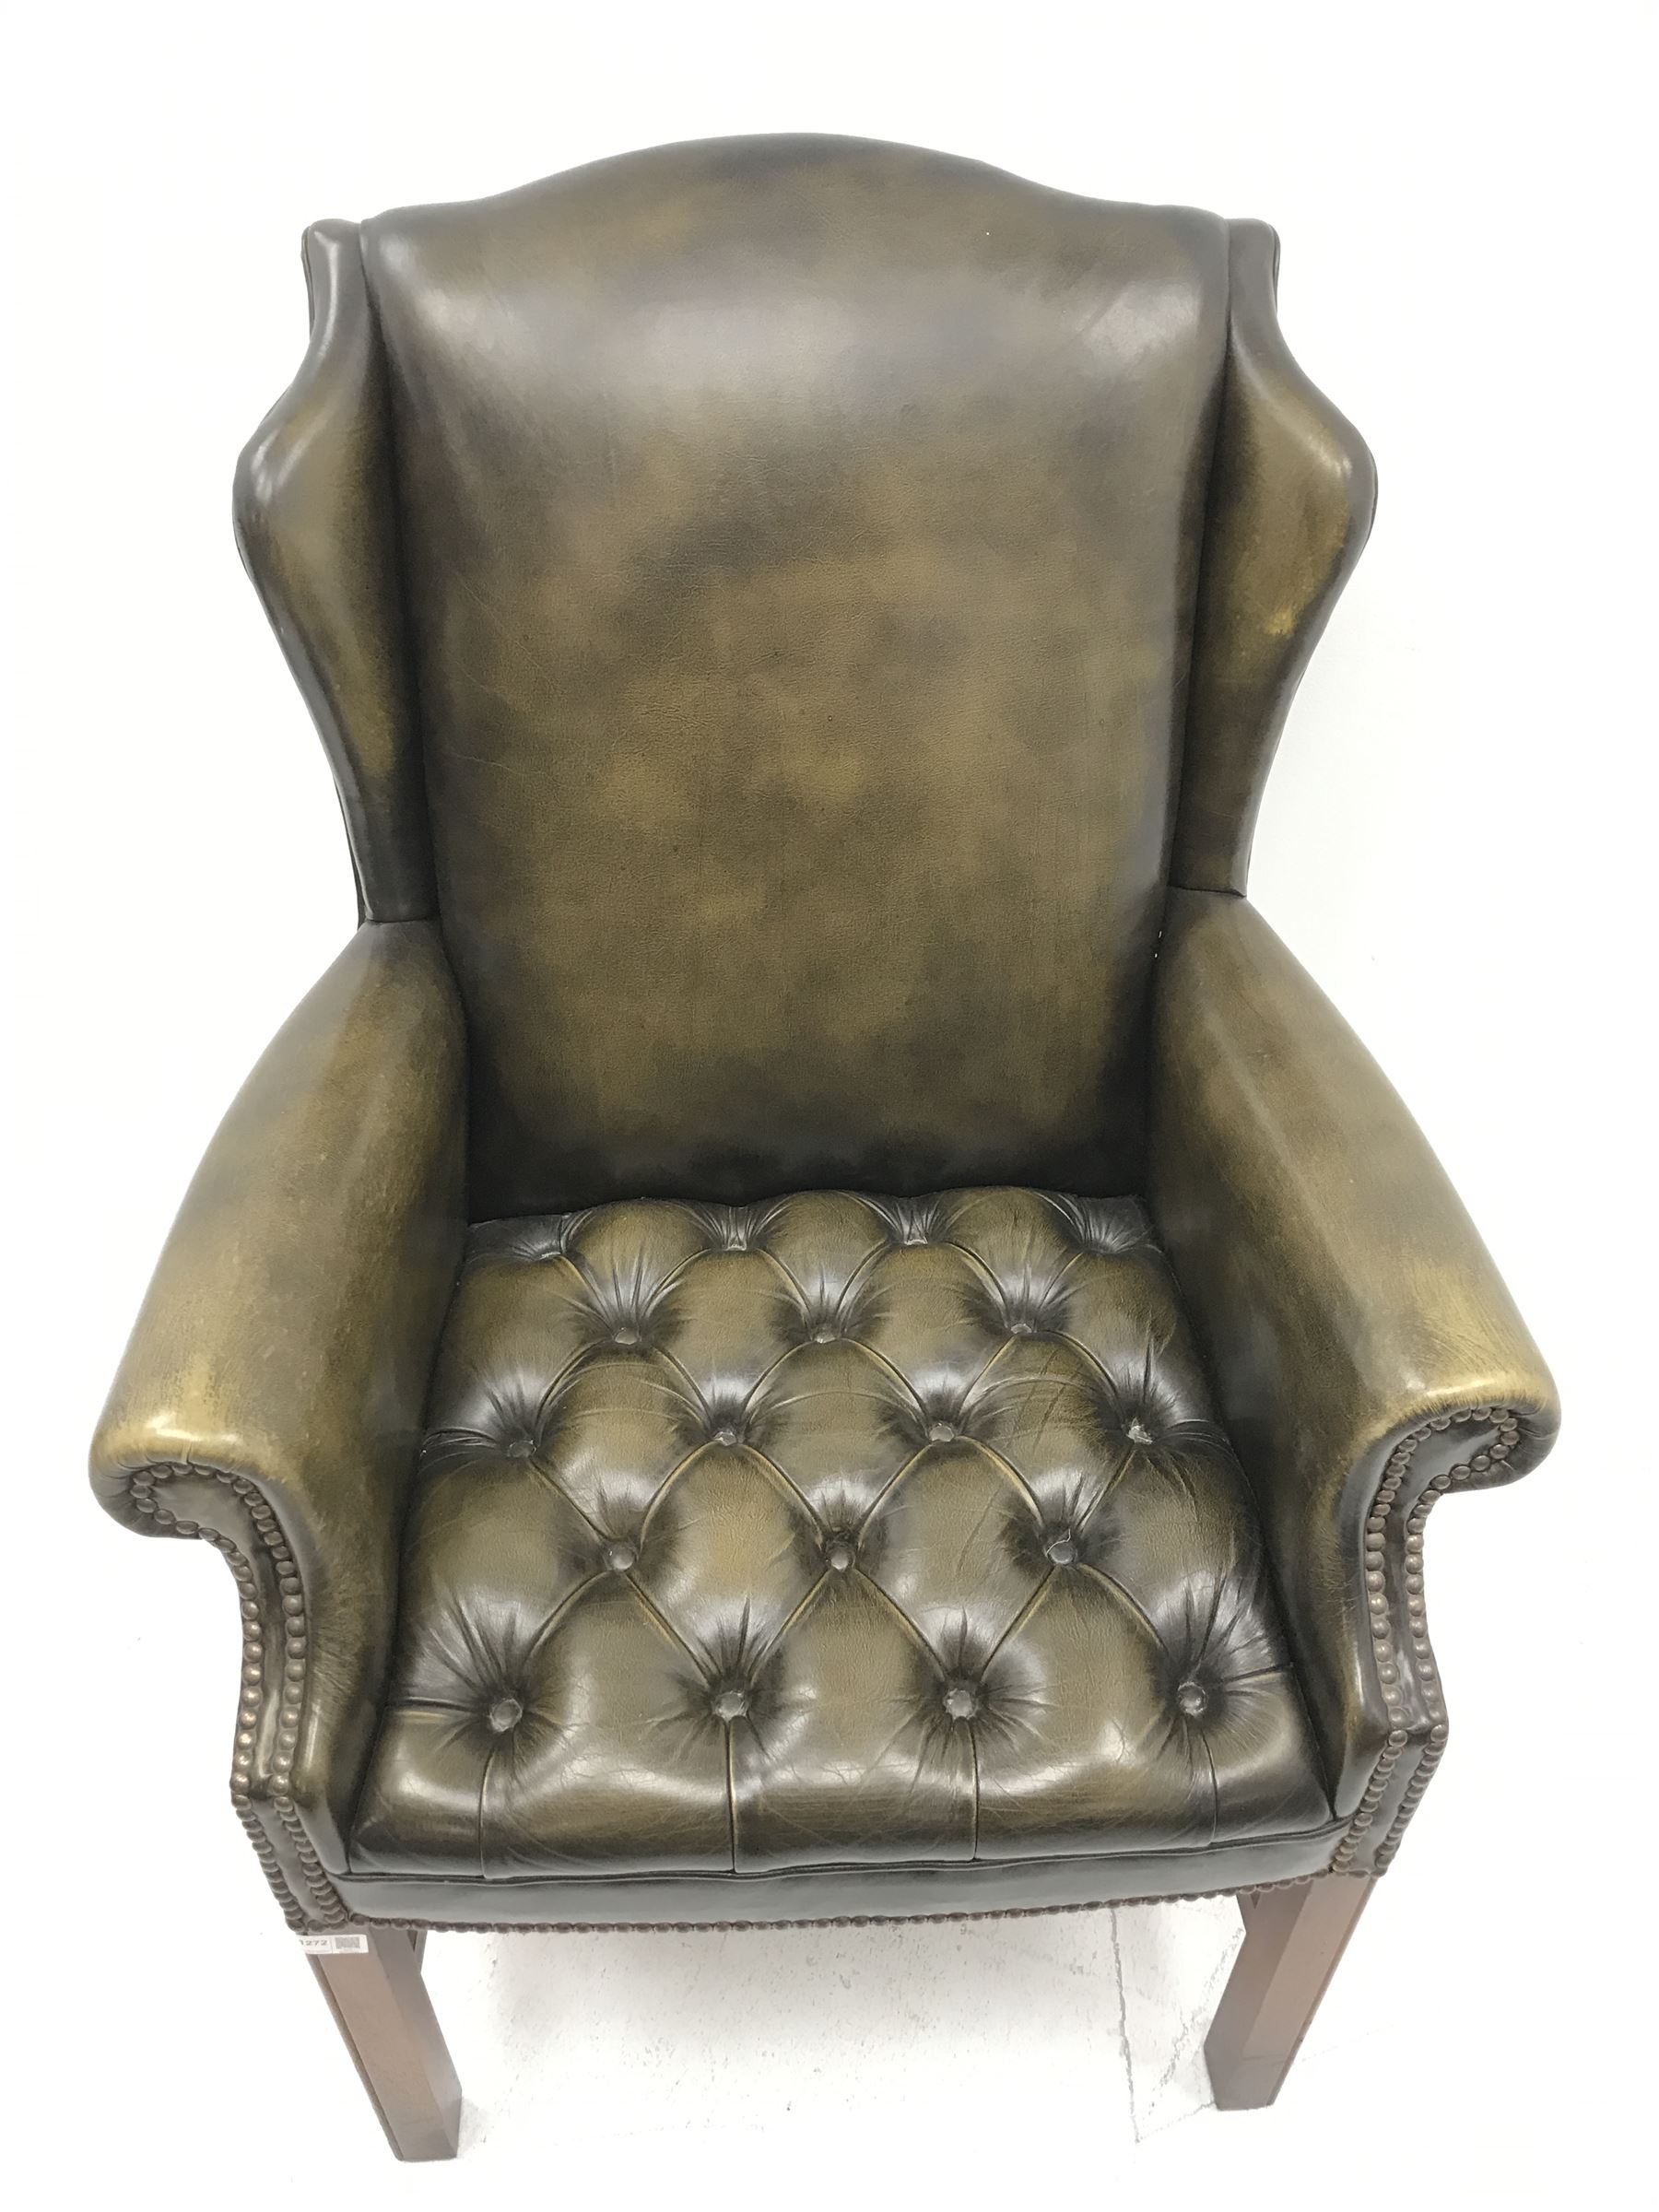 Georgian style wing back armchair upholstered in deep buttoned and studded green leather - Image 2 of 4